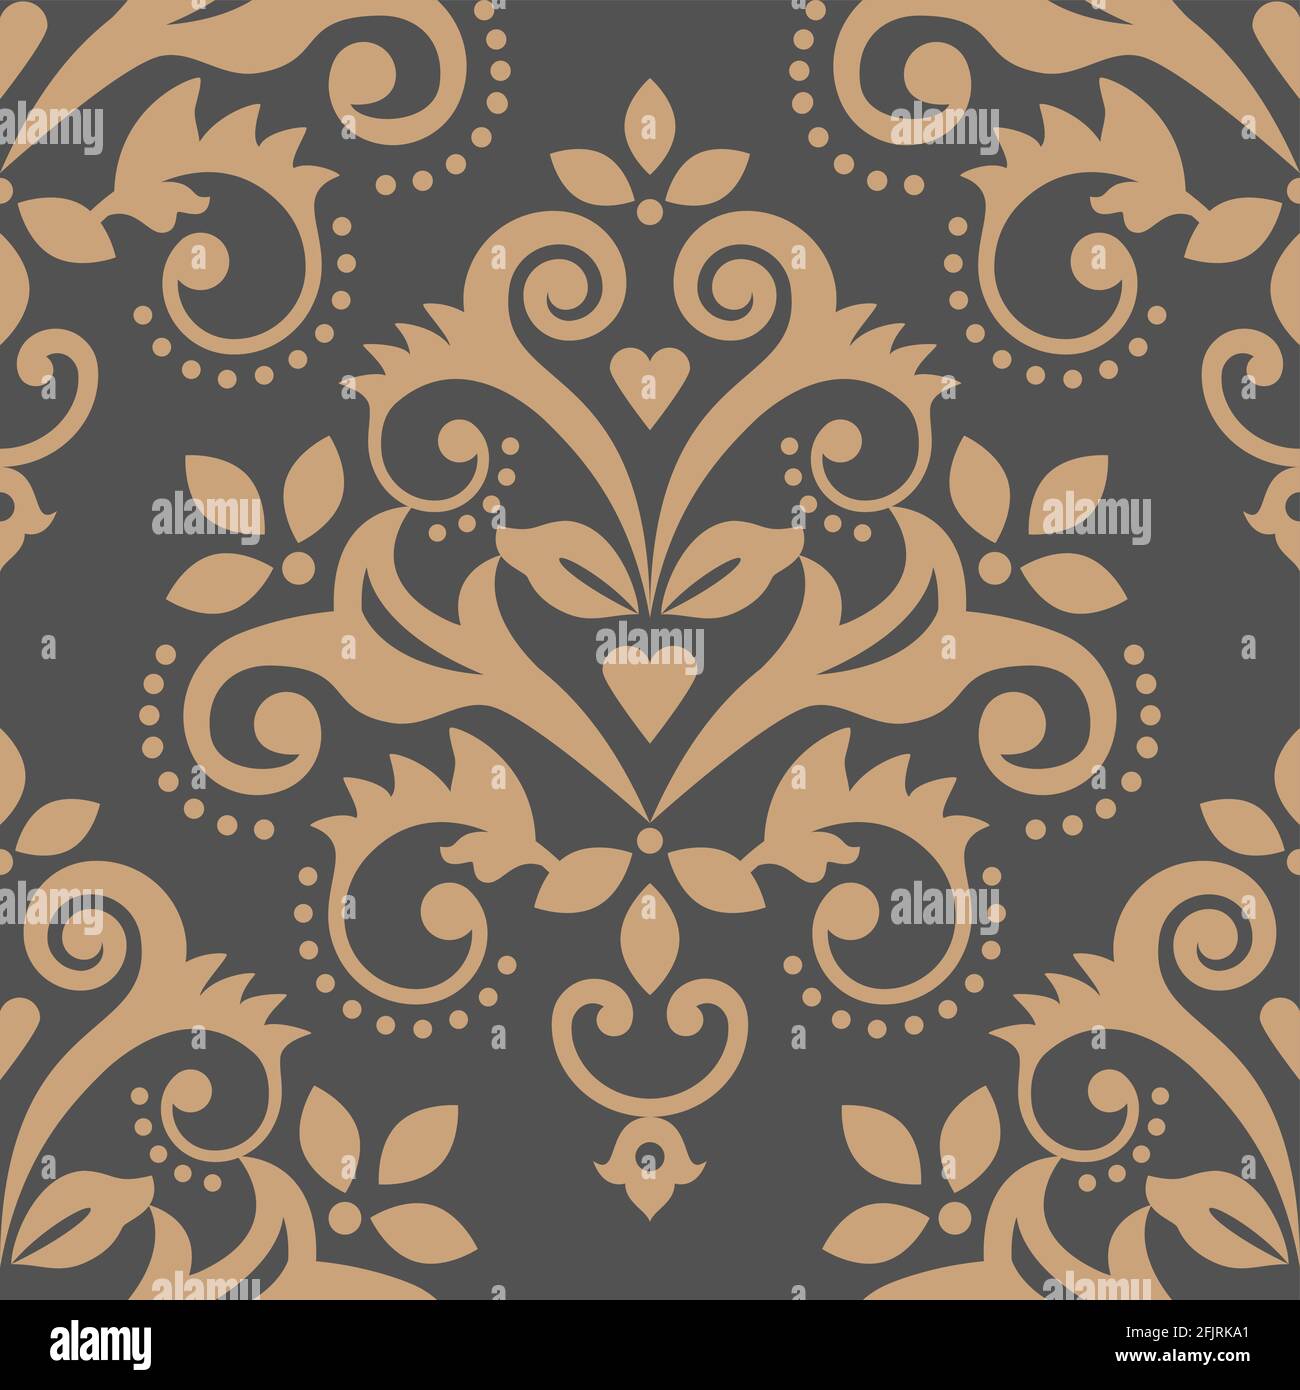 Damask tiled wallpaper, textile or fabric print pattern, traditional vector design with flowers, leaves and swirls Stock Vector